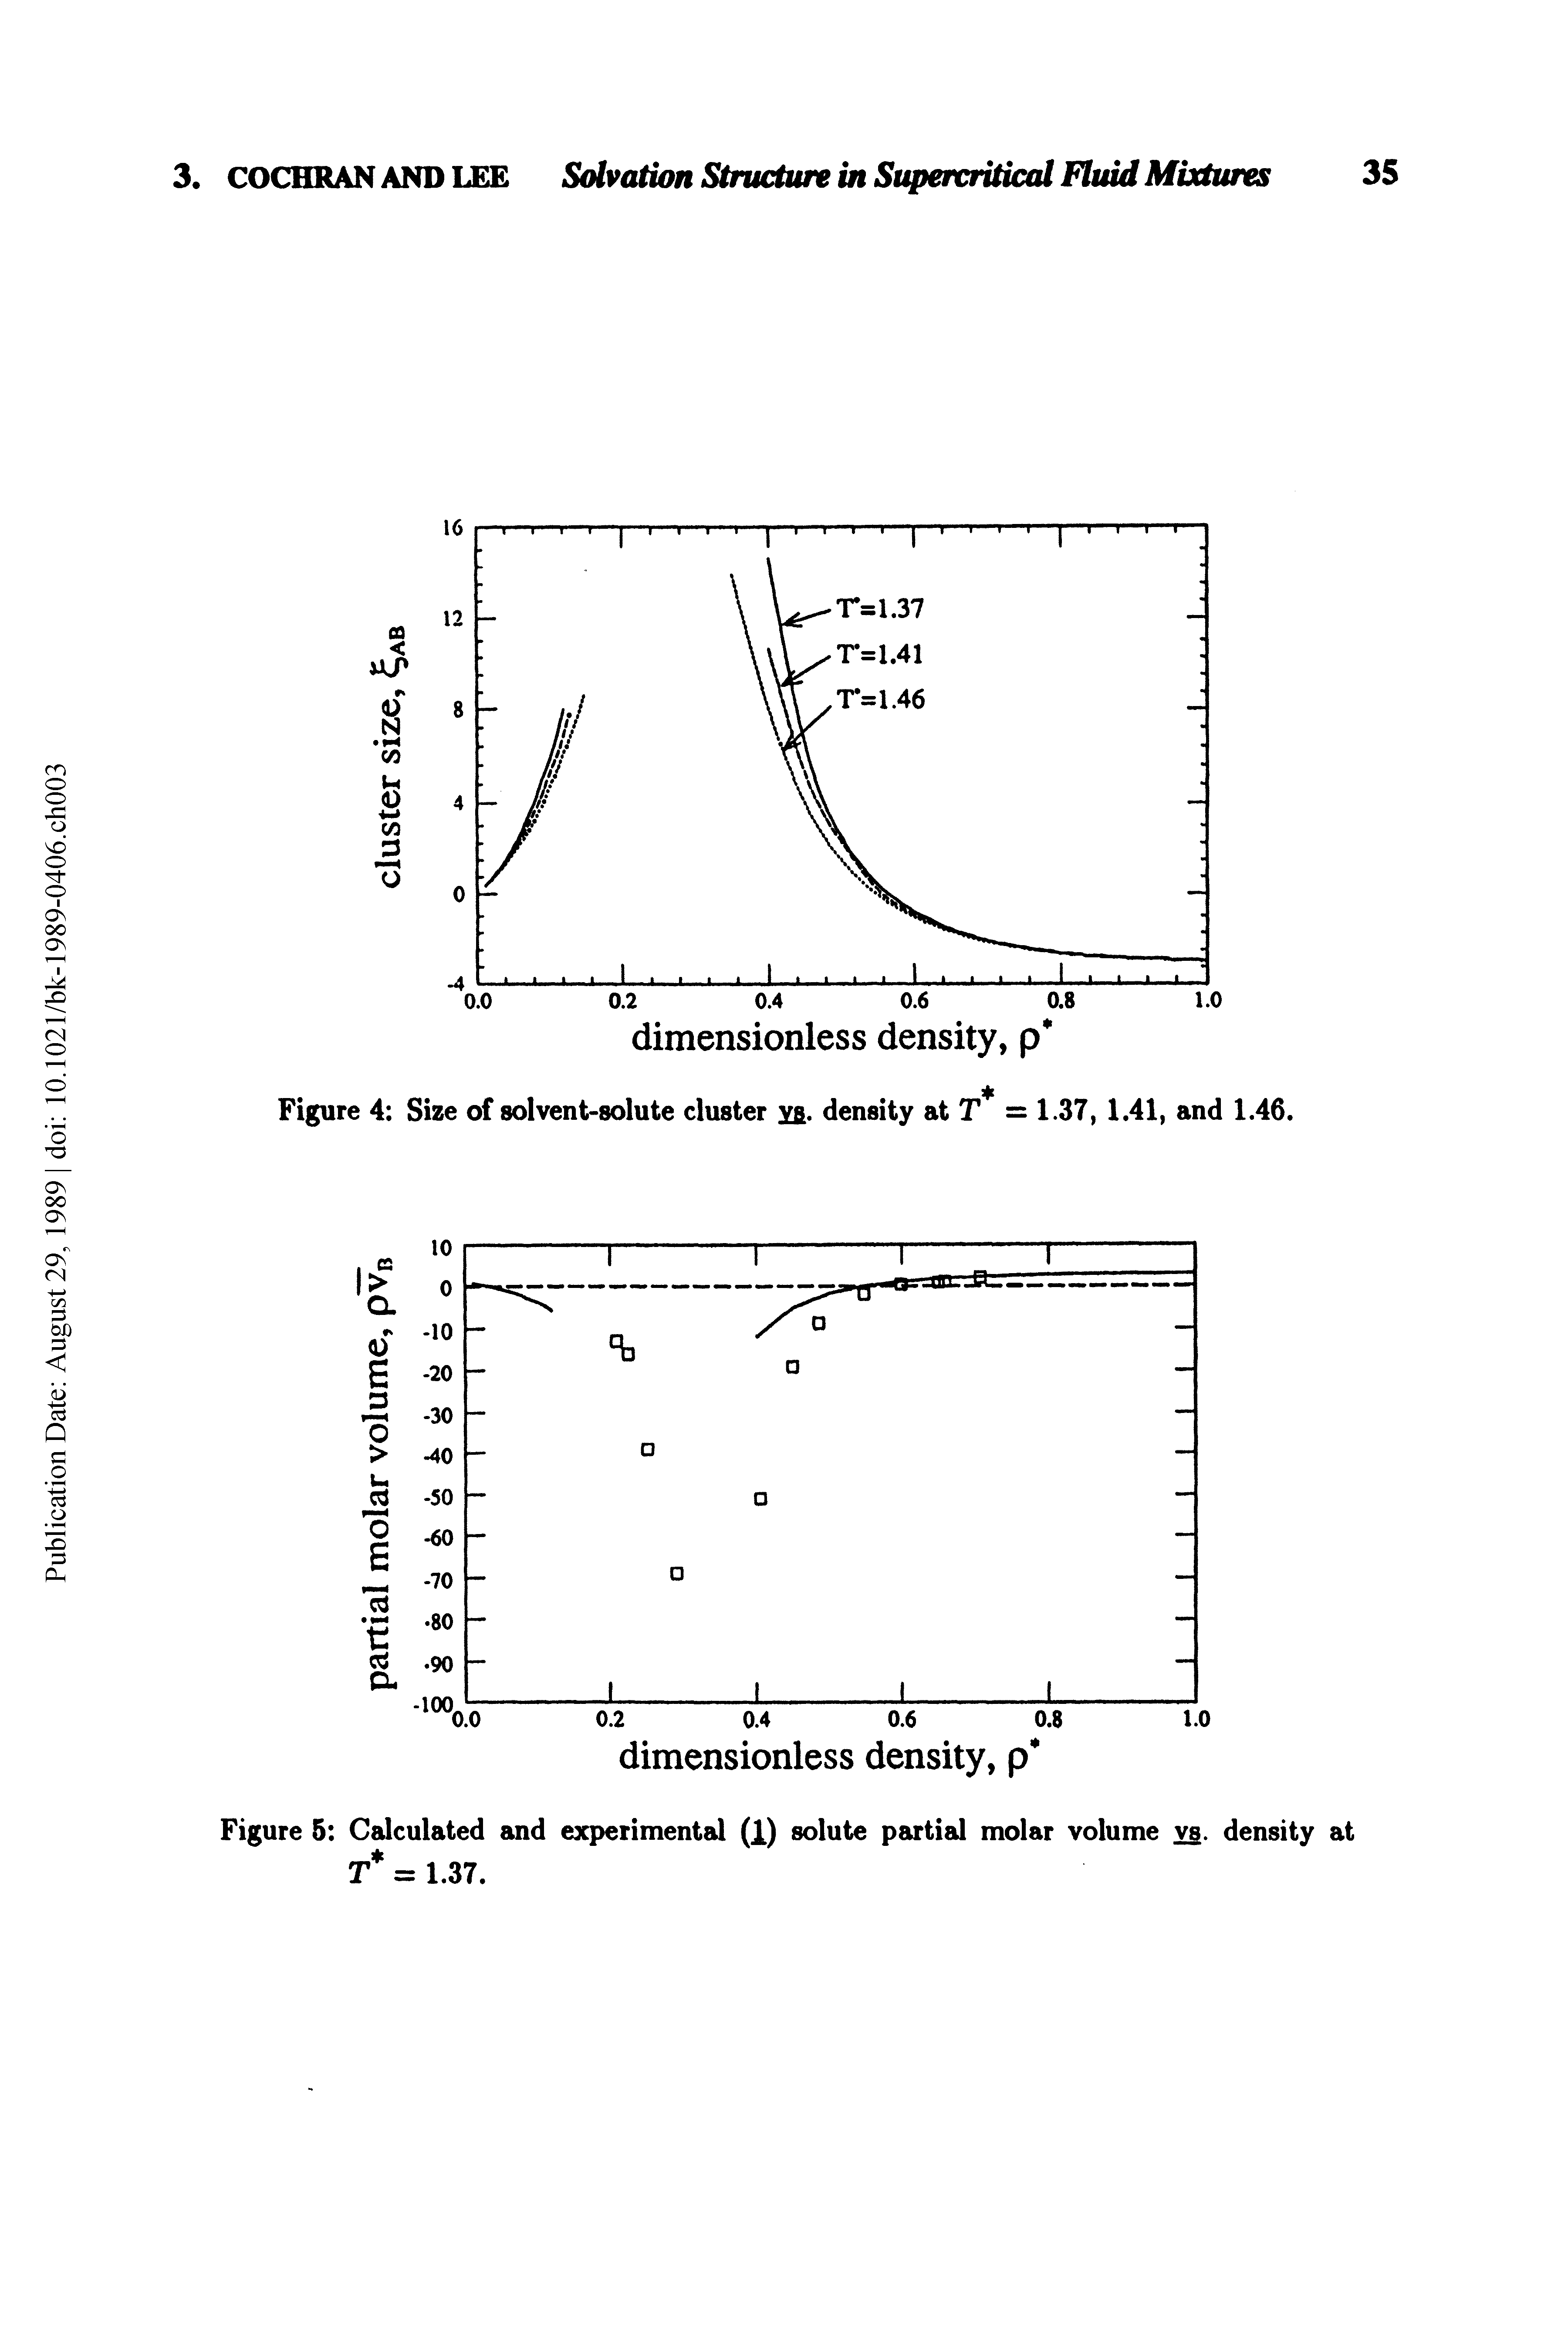 Figure 4 Size of solvent-solute cluster xa. density at T = 1.37, 1.41, and 1.46.